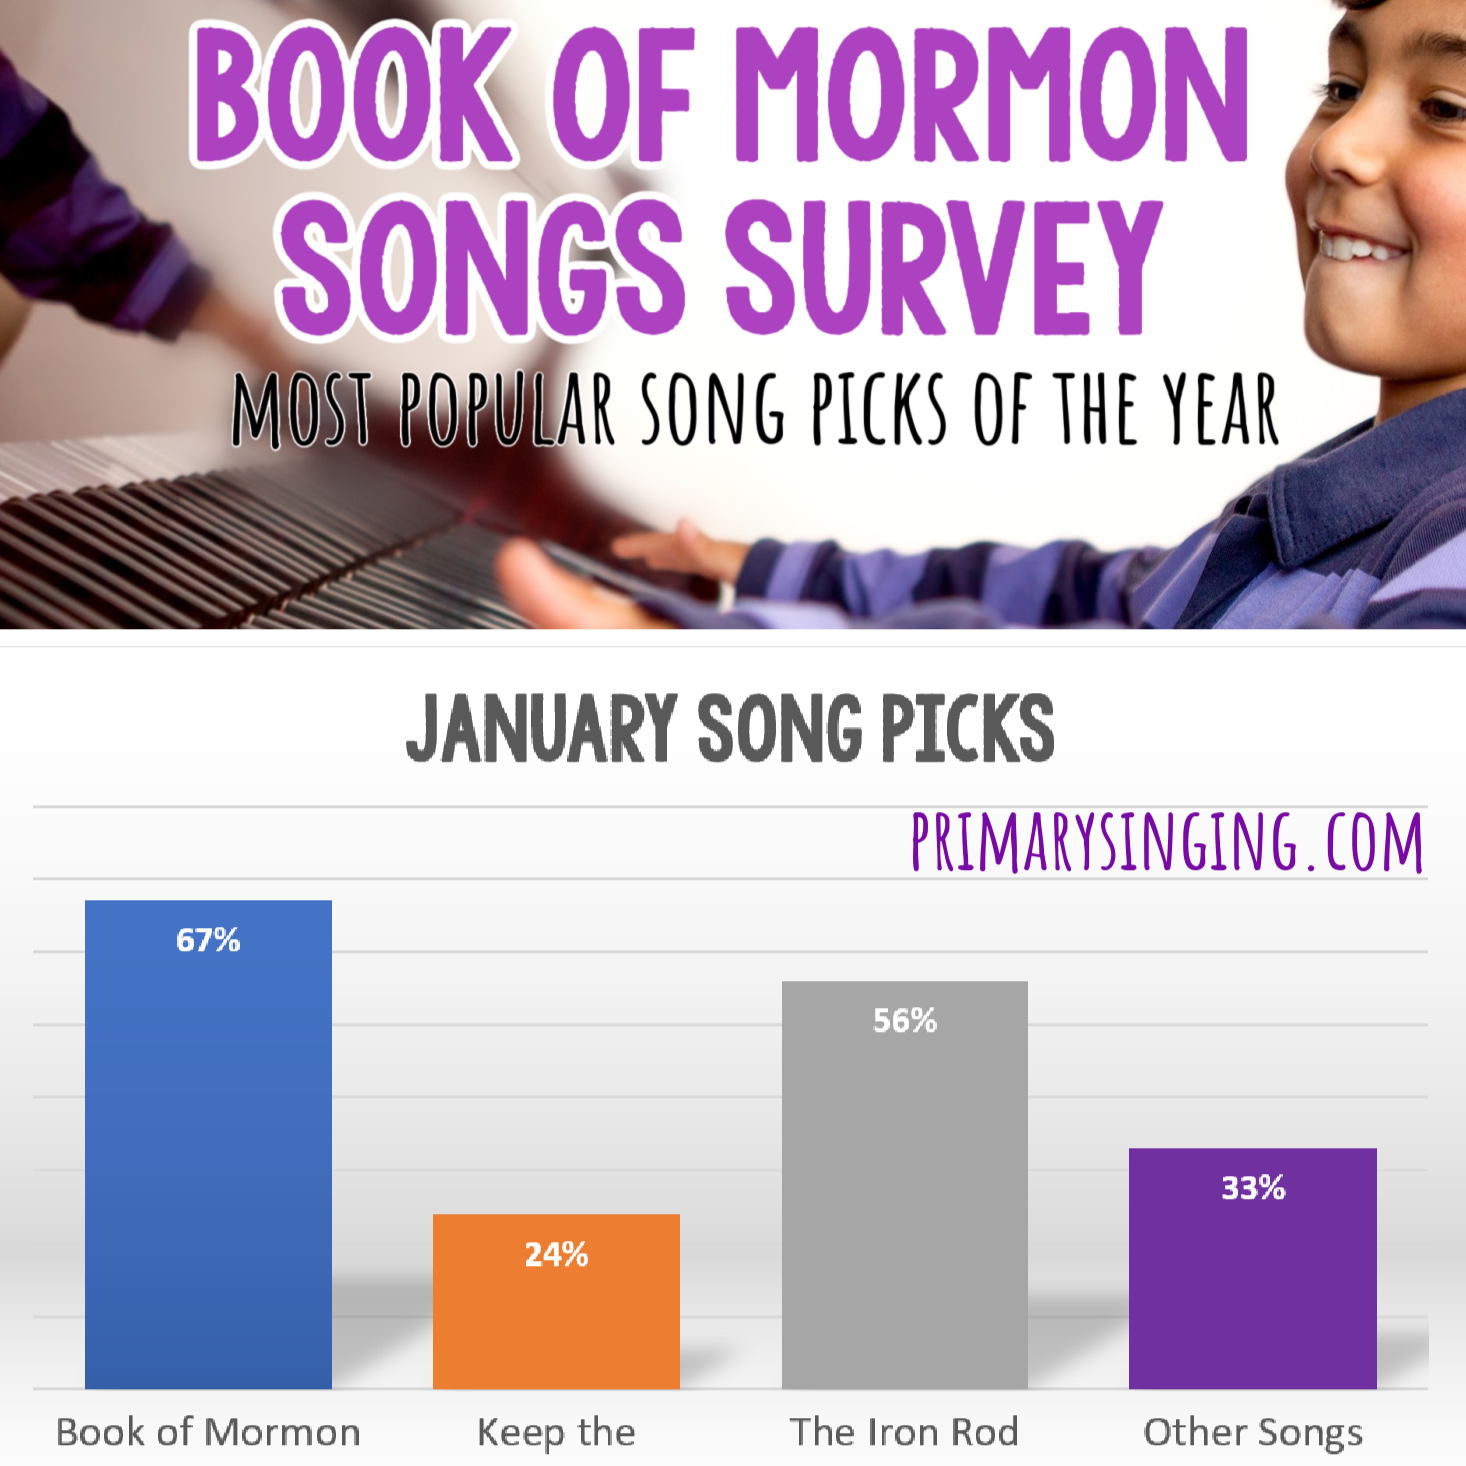 Book of Mormon Primary Songs Survey - See all the most popular Primary Songs picks as part of the Book of Mormon Come Follow Me song list this year!